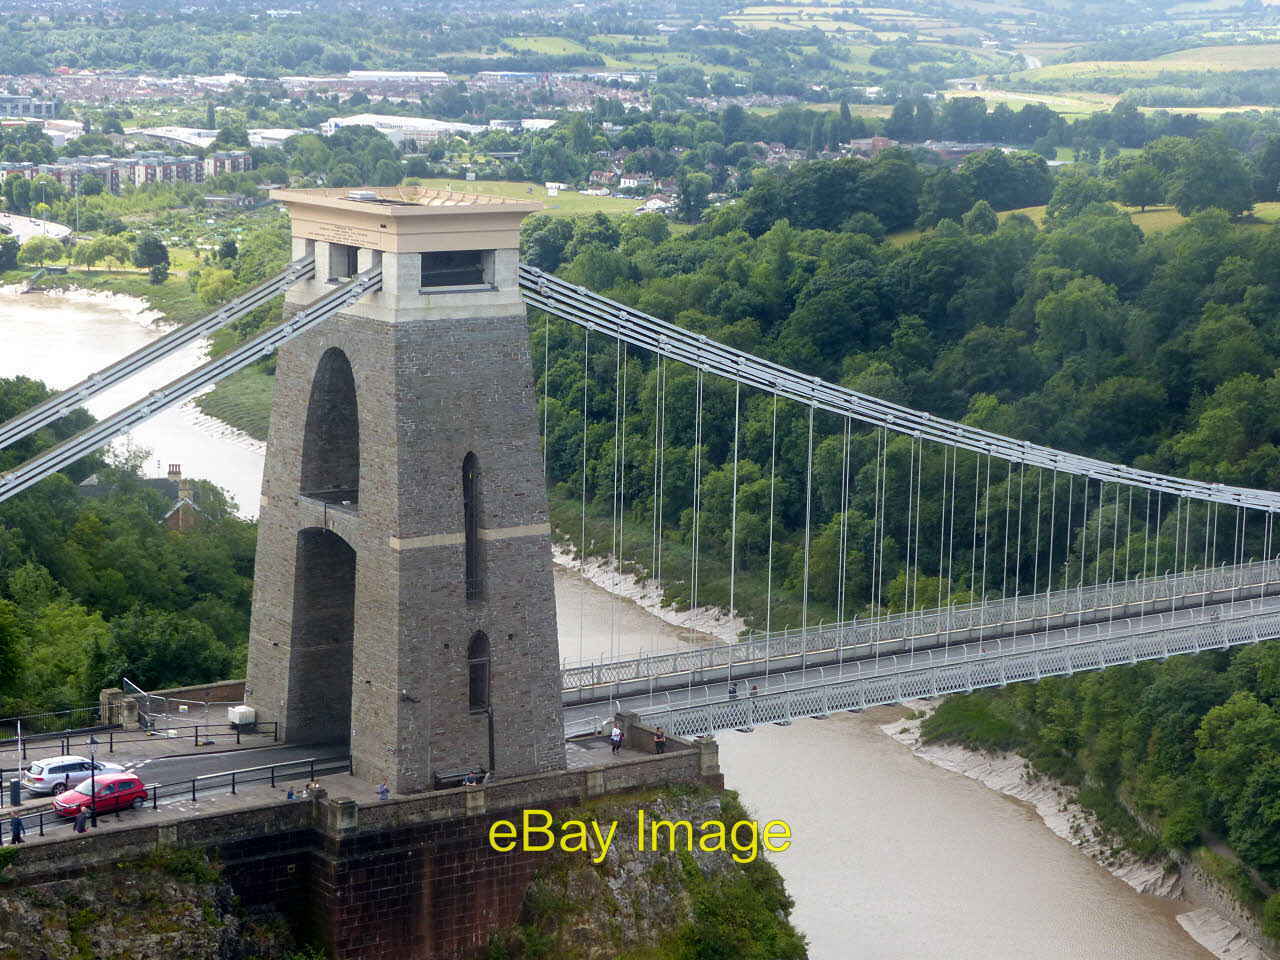 Photo 6x4 Clifton Suspension Bridge, East Tower The view from the top flo c2017